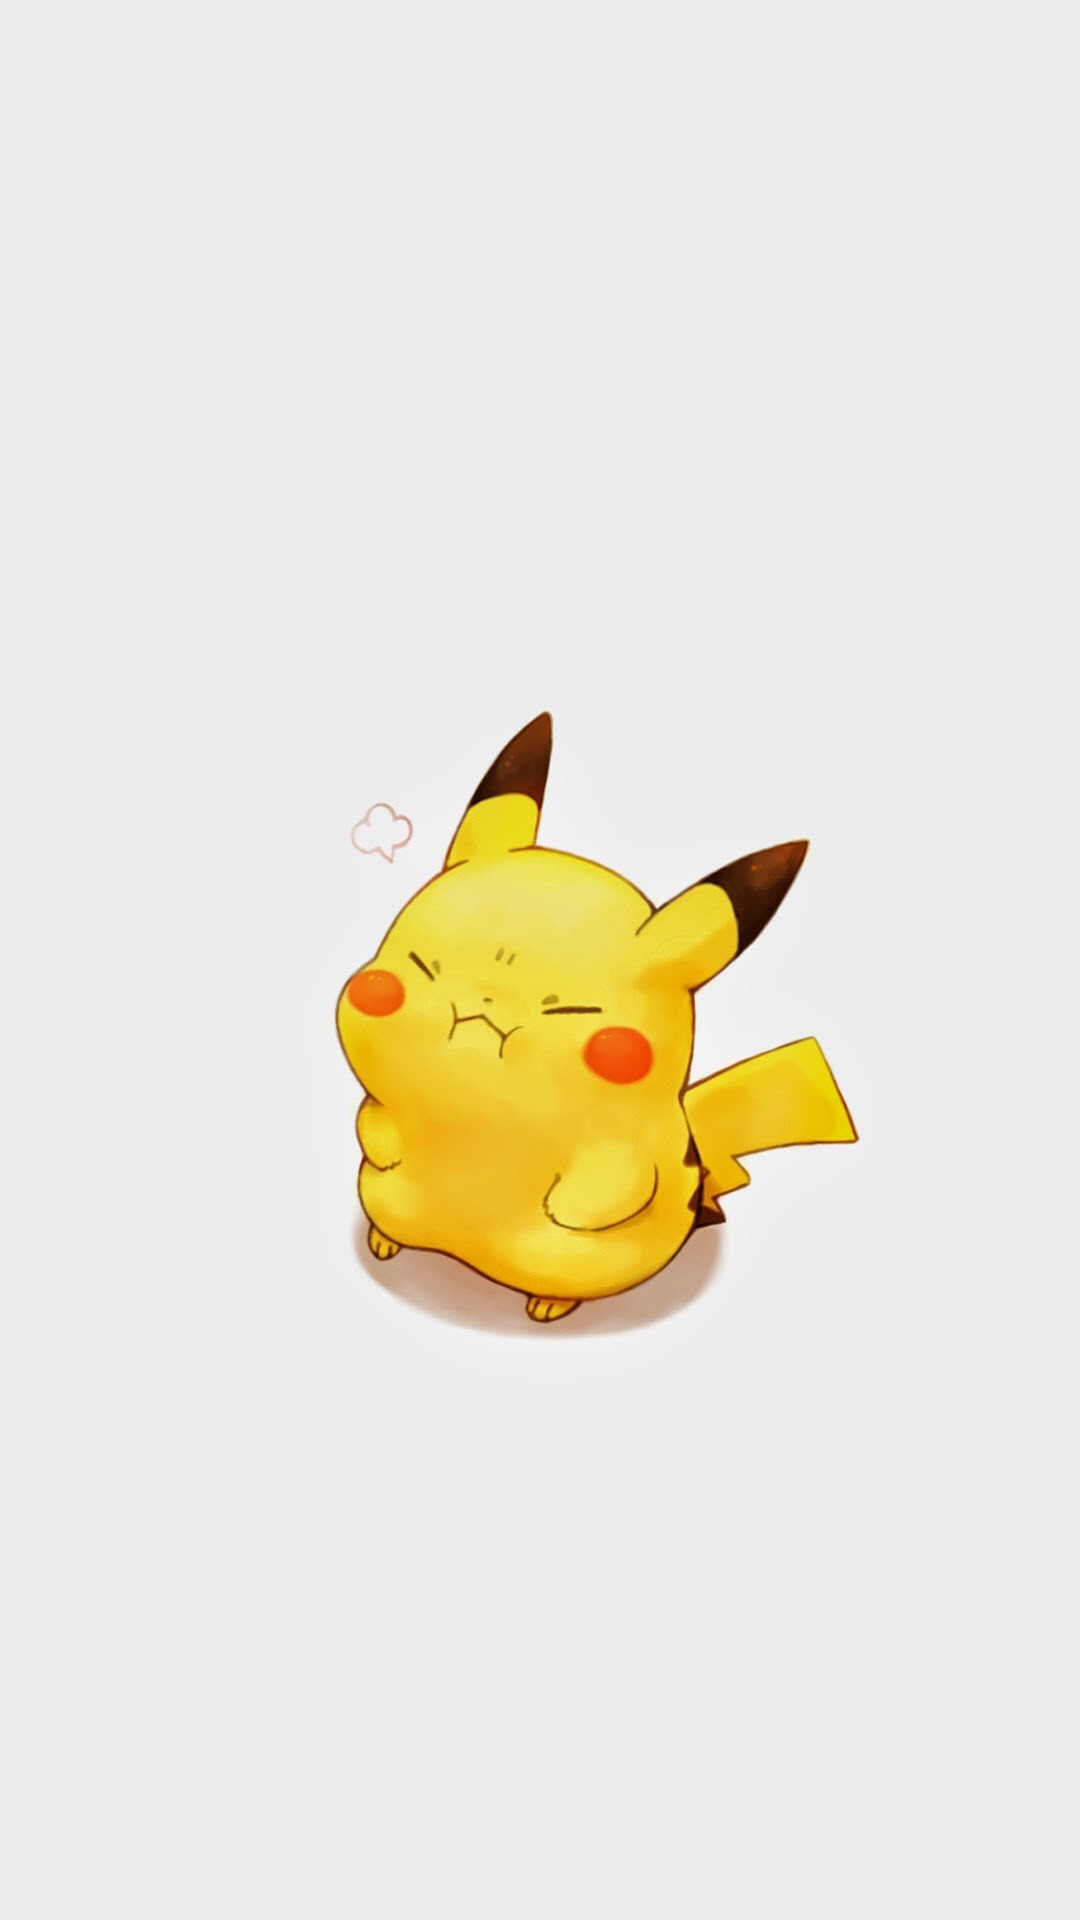 Pikachu Wallpapers 71 Pictures